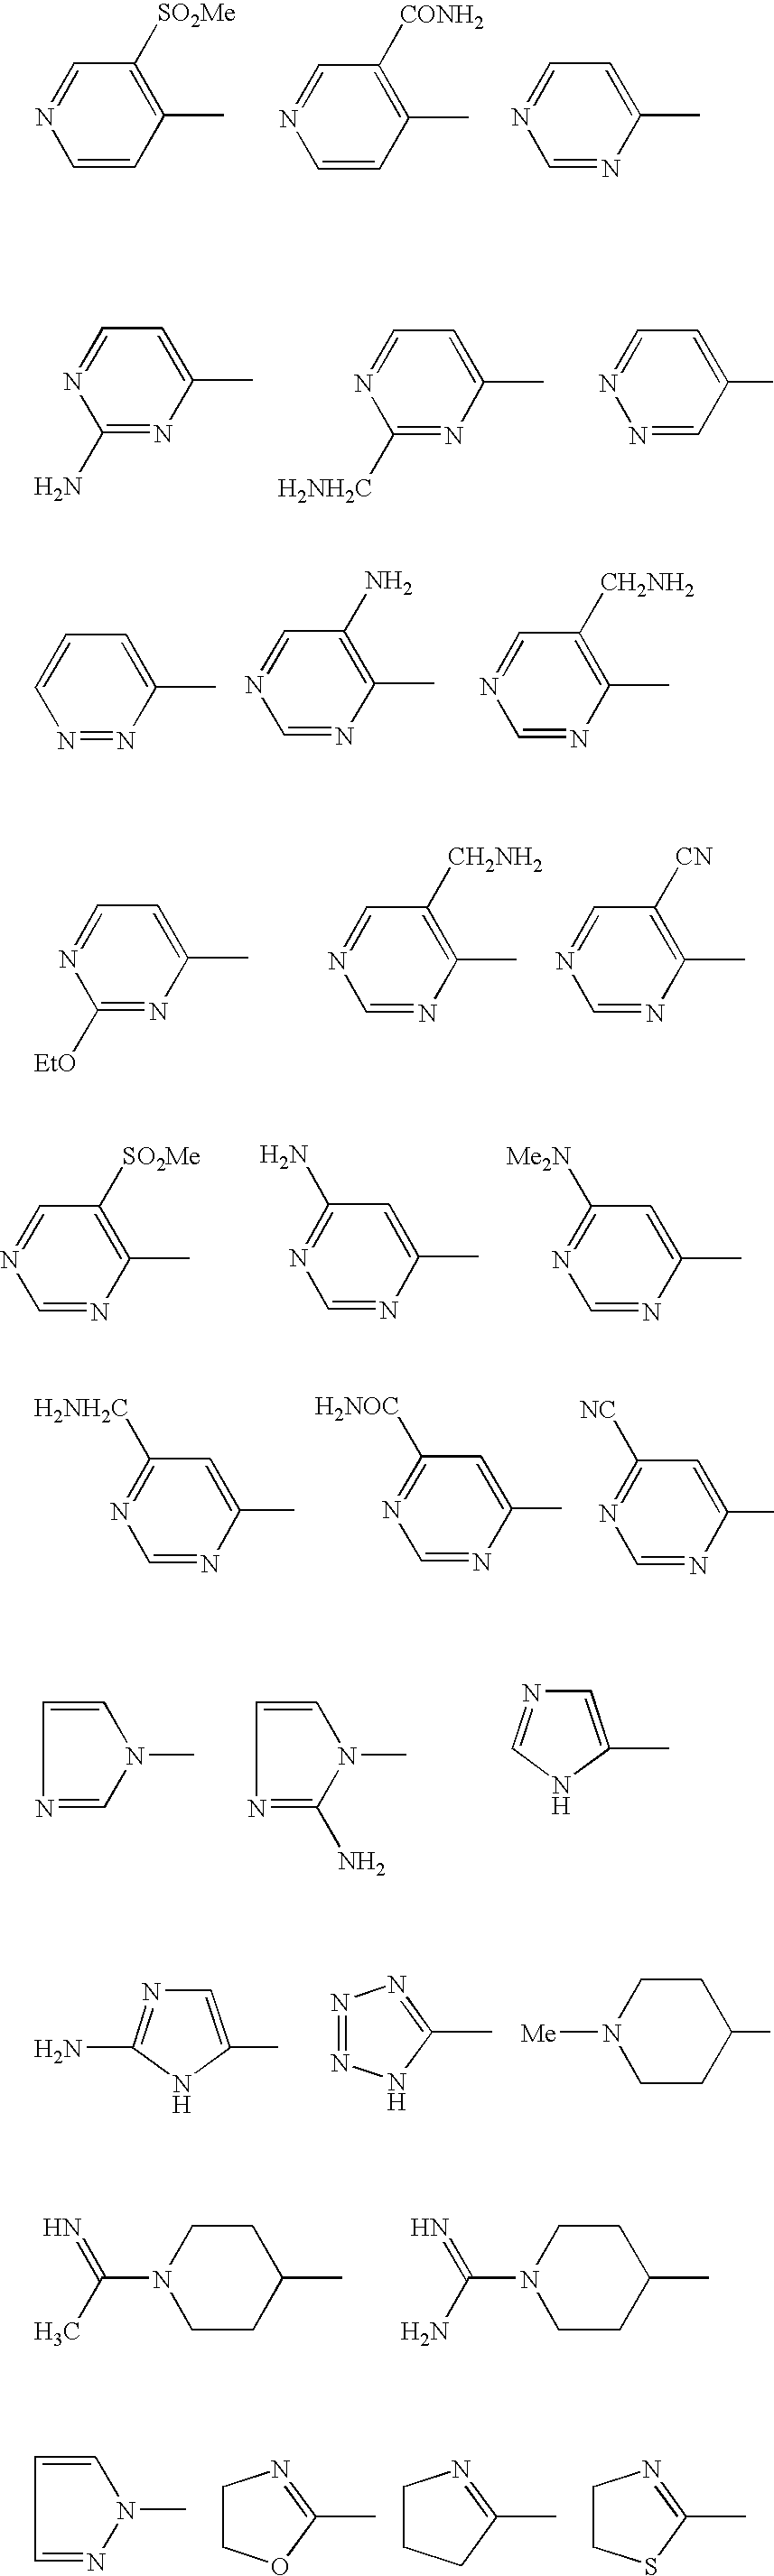 Benzamides and related inhibitors of factor Xa